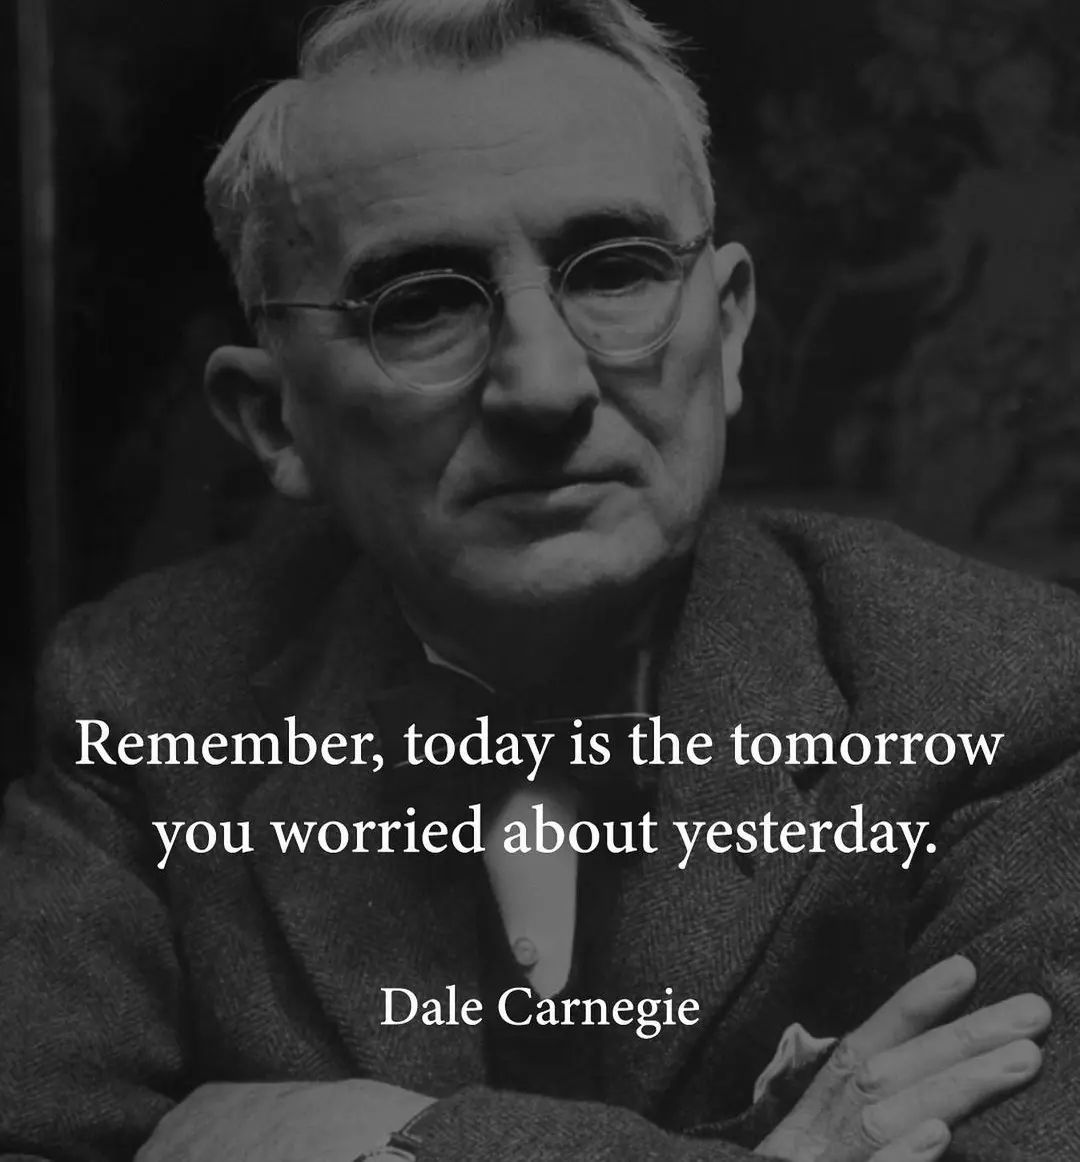 Remember, today is the tomorrow you worried about yesterday.